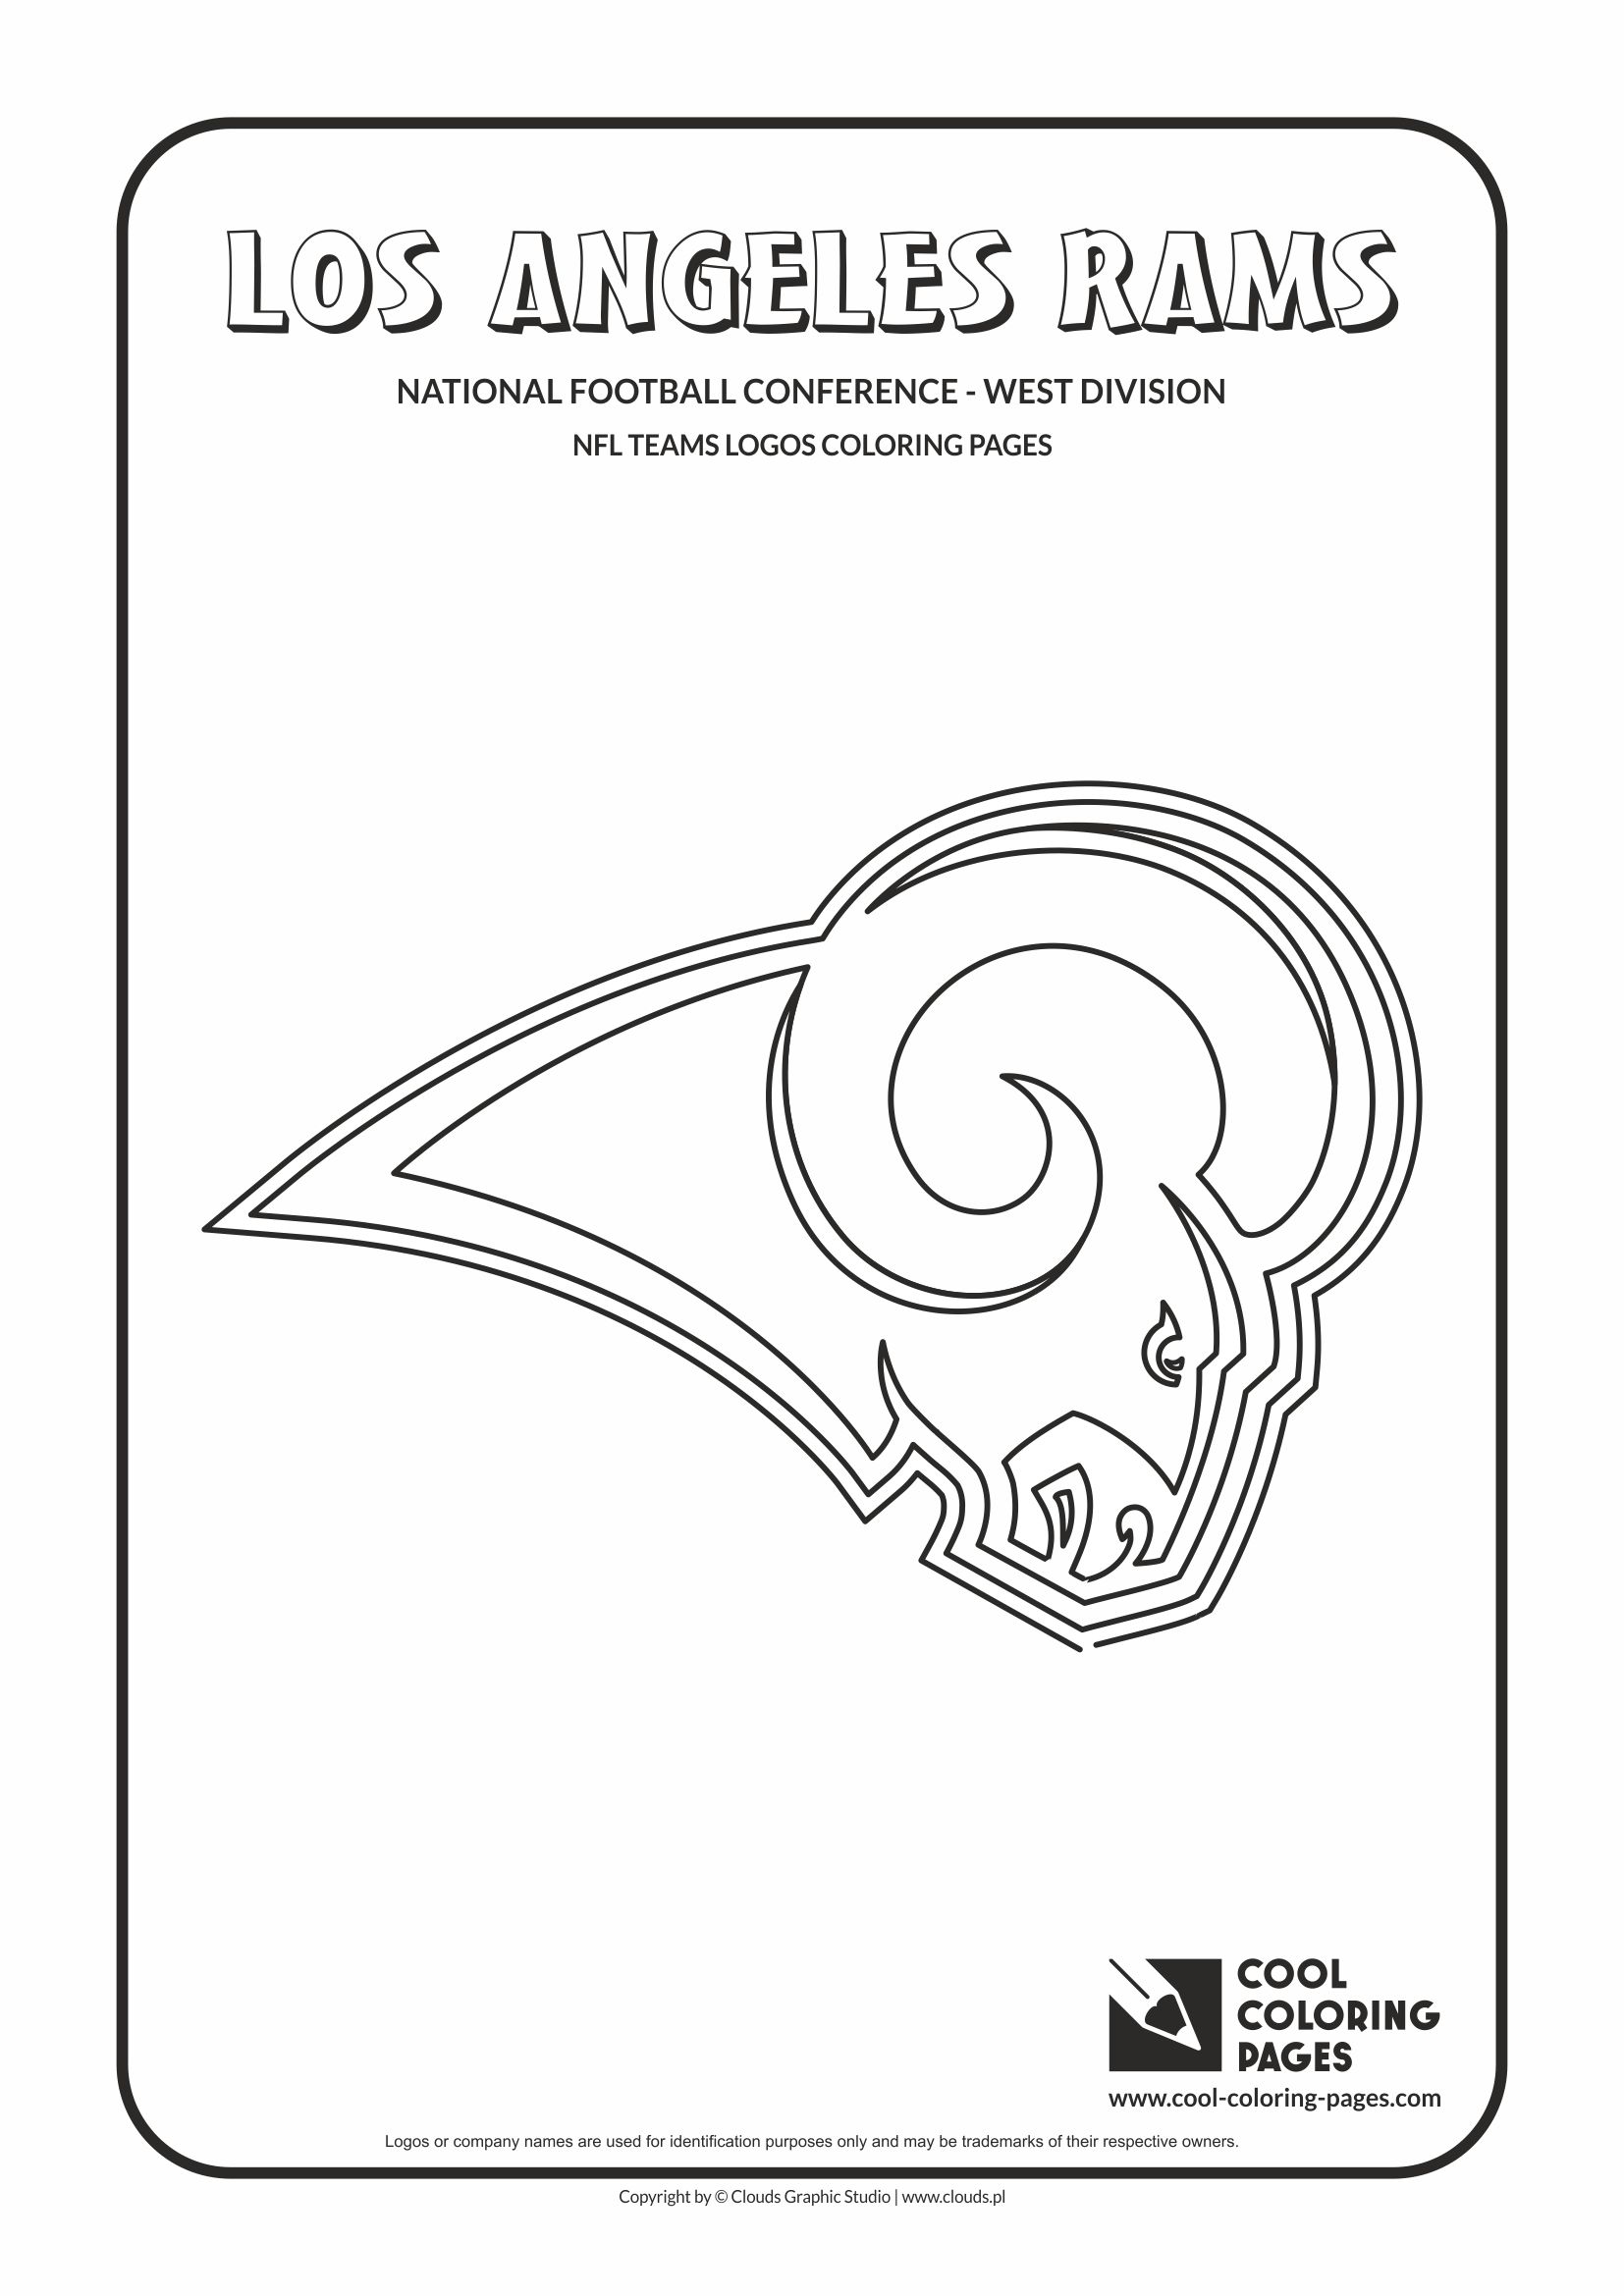 Cool Coloring Pages - NFL American Football Clubs Logos - National Football Conference - West Division / Los Angeles Rams logo / Coloring page with Los Angeles Rams logo